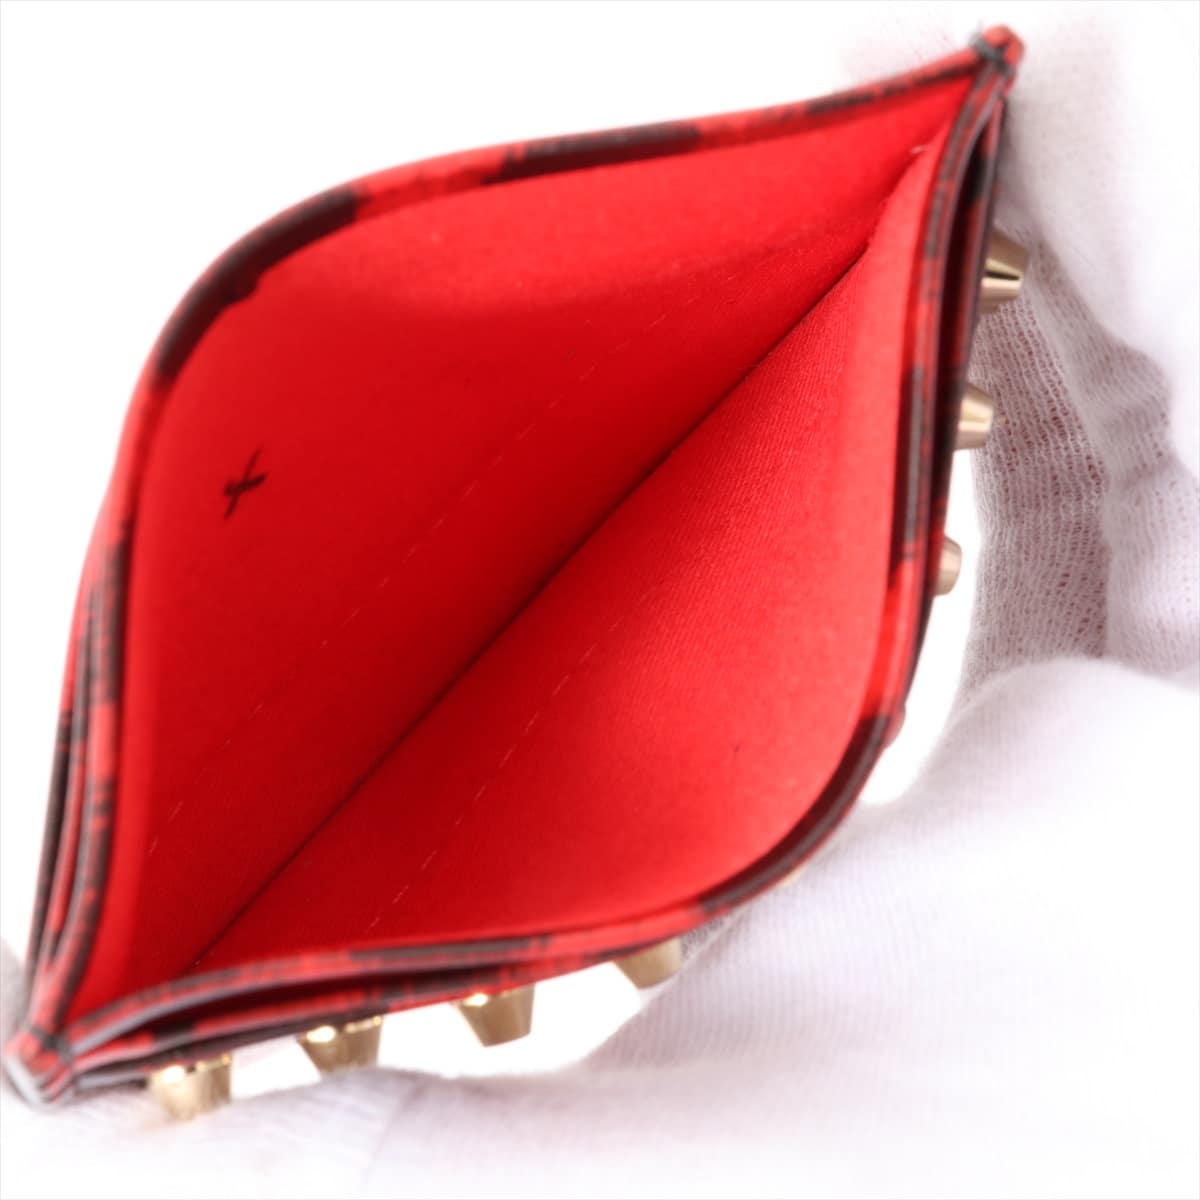 Christian Louboutin Studs Leather Pass case Red